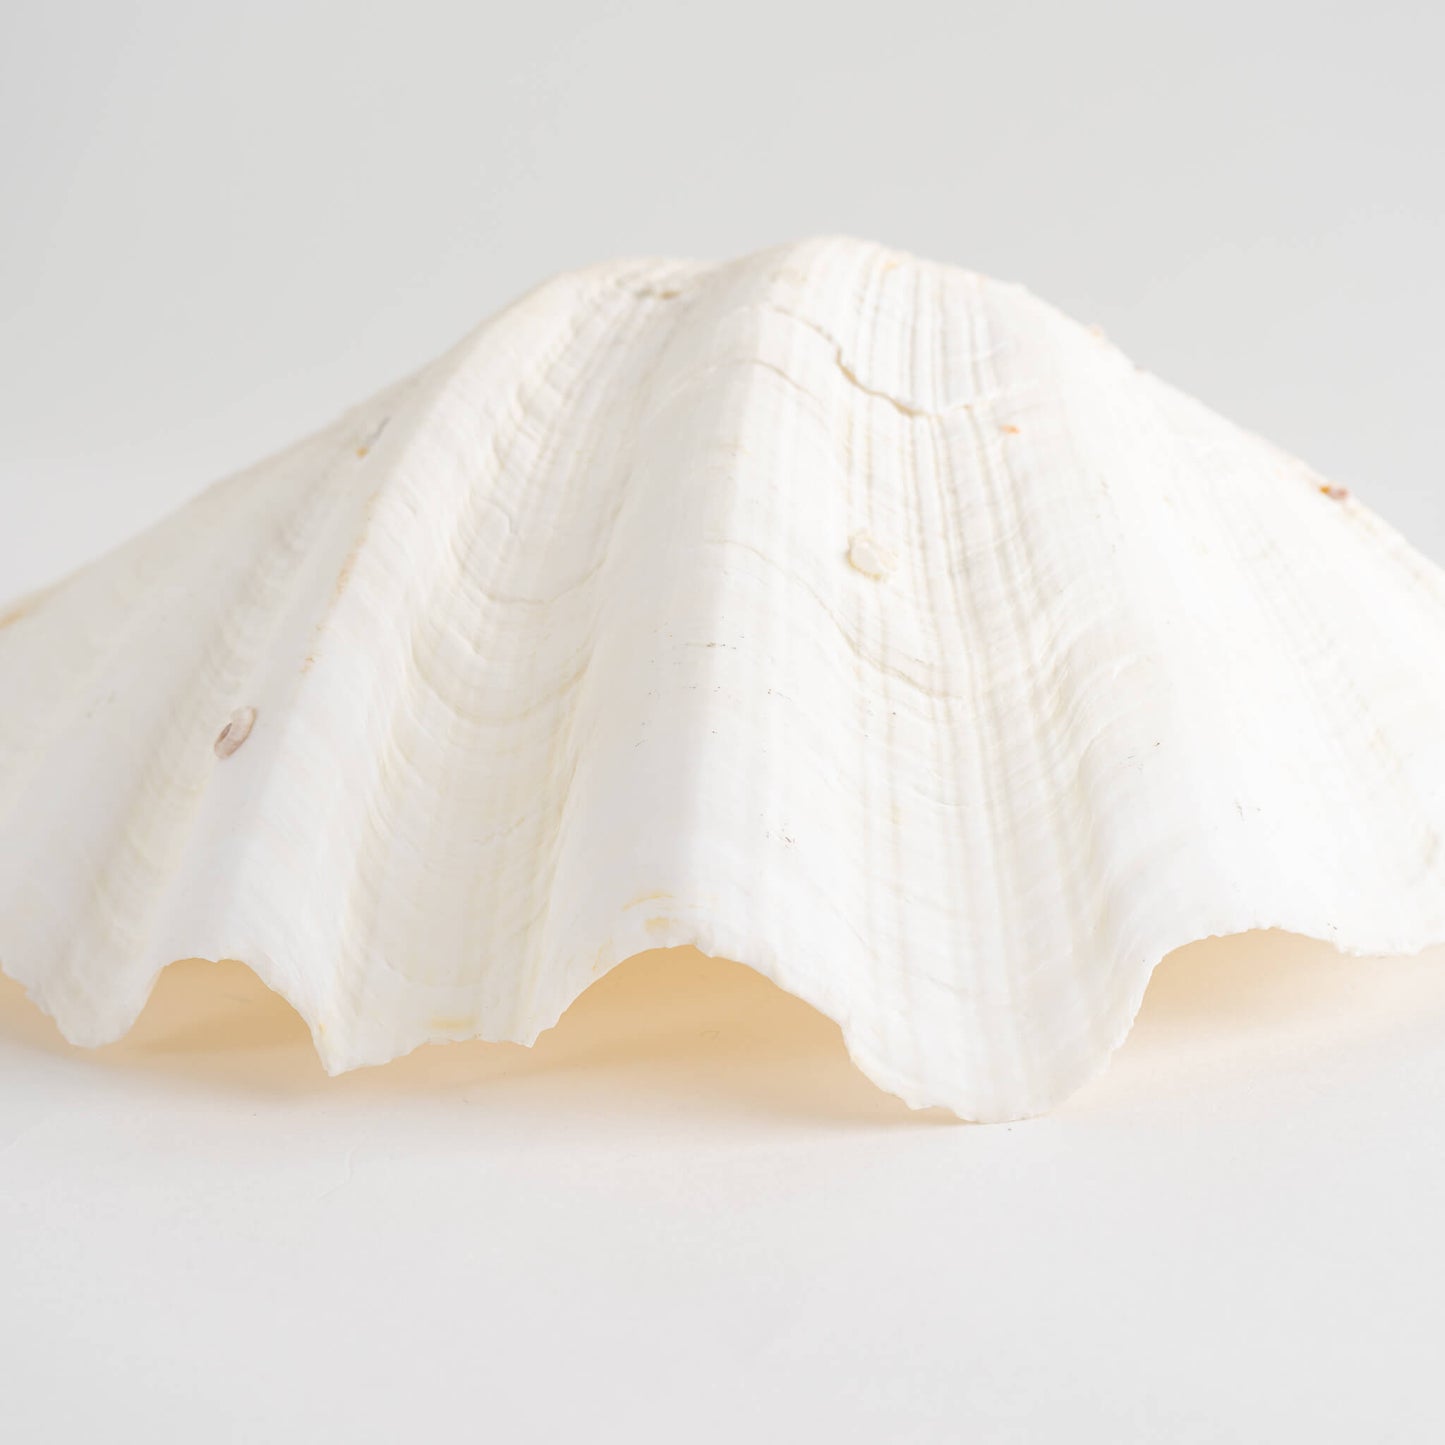 Large South Pacific Tridacna Gigas Clam Shell Specimen